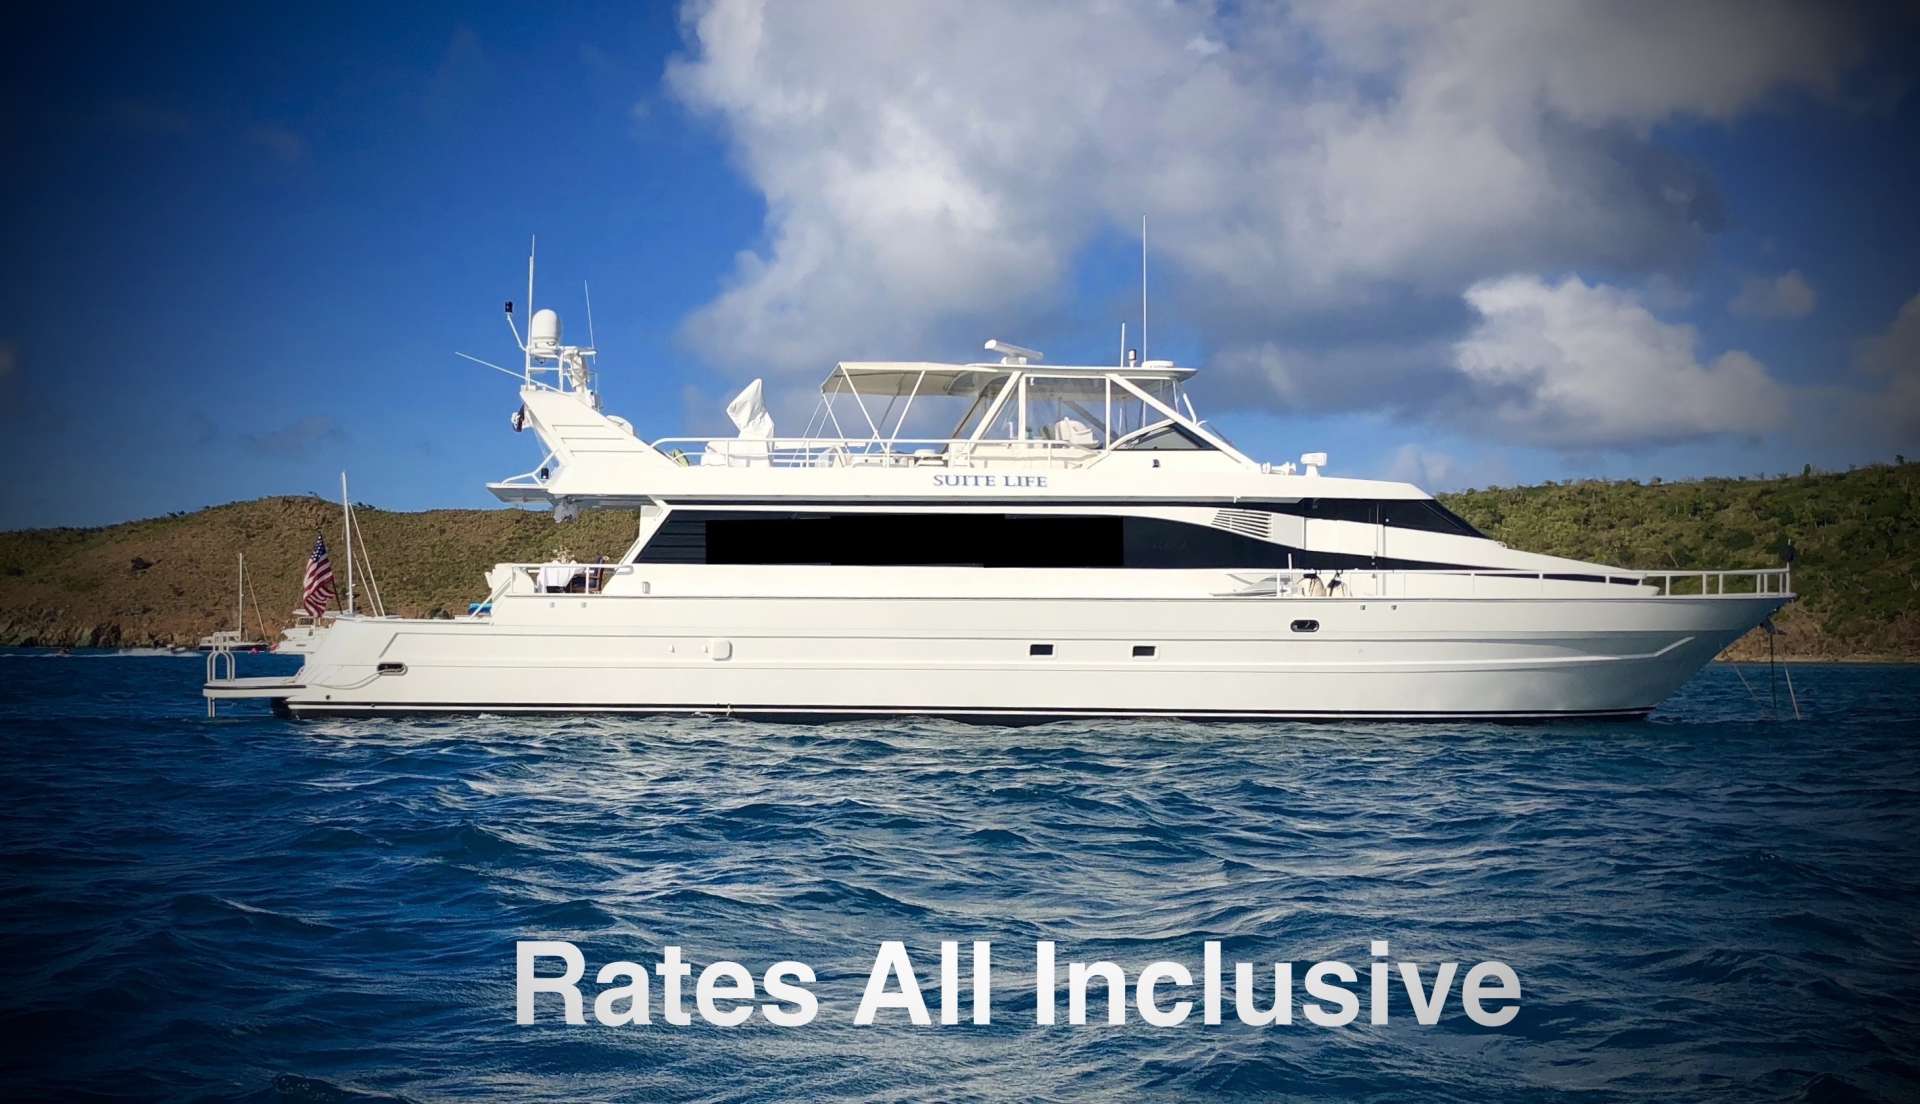 Welcome aboard SUITE LIFE, your private ALL-INCLUSIVE 92&rsquo; x 22&rsquo; (3,000 sq ft) floating luxury resort. 
She was completely refitted in 2020, however, as owner operators we continually improve and keep her fresh! In fact, 2023 is our 8th charter season in the U.S. and British Virgin Islands! Suite Life has 4 staterooms, 5 baths, plus separate crew quarters, and accommodates up to 9 guests in air conditioned luxury. Her spacious layout offers 2 bars, 3 dining areas, a day head and an expansive salon for comfortable seating and movies on-demand. 

Gaze at a new sunrise every morning while you workout on the BowFlex elliptical or sip coffee in the aft alfresco teak dining area. Bask the day away relaxing on the upper deck lounges, over-sized bow sun pad, or if you prefer, snorkeling right off the expansive swim platform. End the day, toasting with champagne in the outdoor bow fresh or saltwater pool.

Suite Life&rsquo;s luxury staterooms are all appointed with percale sheets, Egyptian cotton towels and robes to provide ultra comfort during guests private yacht charter. The Master Silver Palm Suite has a King bed, walk-in closet, security box, vanity table, sofa and master bathroom with full jacuzzi.The VIP Bay Rum Suite has a walk-around queen and walk-in closet. The port side Spice Berry Suite guest stateroom has a queen bed and large closet. The starboard Wild Coral Suite guest stateroom has a full bed and twin.

All staterooms have marbled en-suite bathrooms with enclosed showers. Each bedroom also has its own &ldquo;smart&rdquo; flat-screen televisions, with WiFi access, Bluetooth stereos and individual climate control, air conditioned 24/7.

Suite Life&rsquo;s professional, friendly and knowledgeable crew of four will show you the secret hidden treasures of the Virgin Islands few know about. We ensure our guests vacation is effortless, so sit back, relax and live the Suite Life. 

Note: Suite Life M/Y has both a U.S. and British Virgin Island Business license so it is able to operate across all of these 60+ Islands and Cays. 
